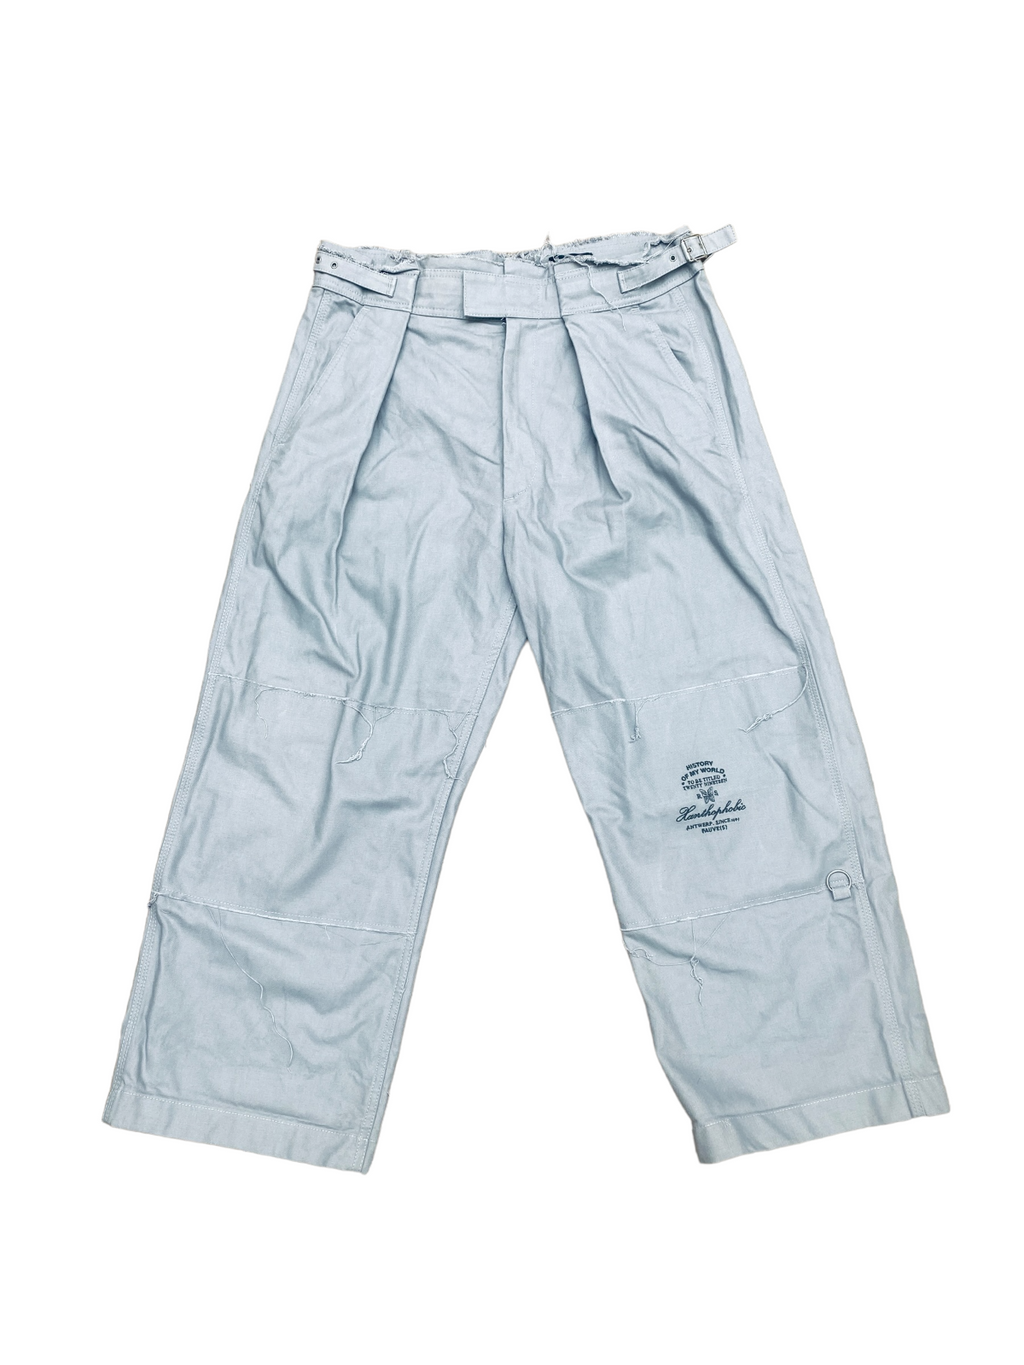 AW19 / 20 Wide Space Astronaut Pants